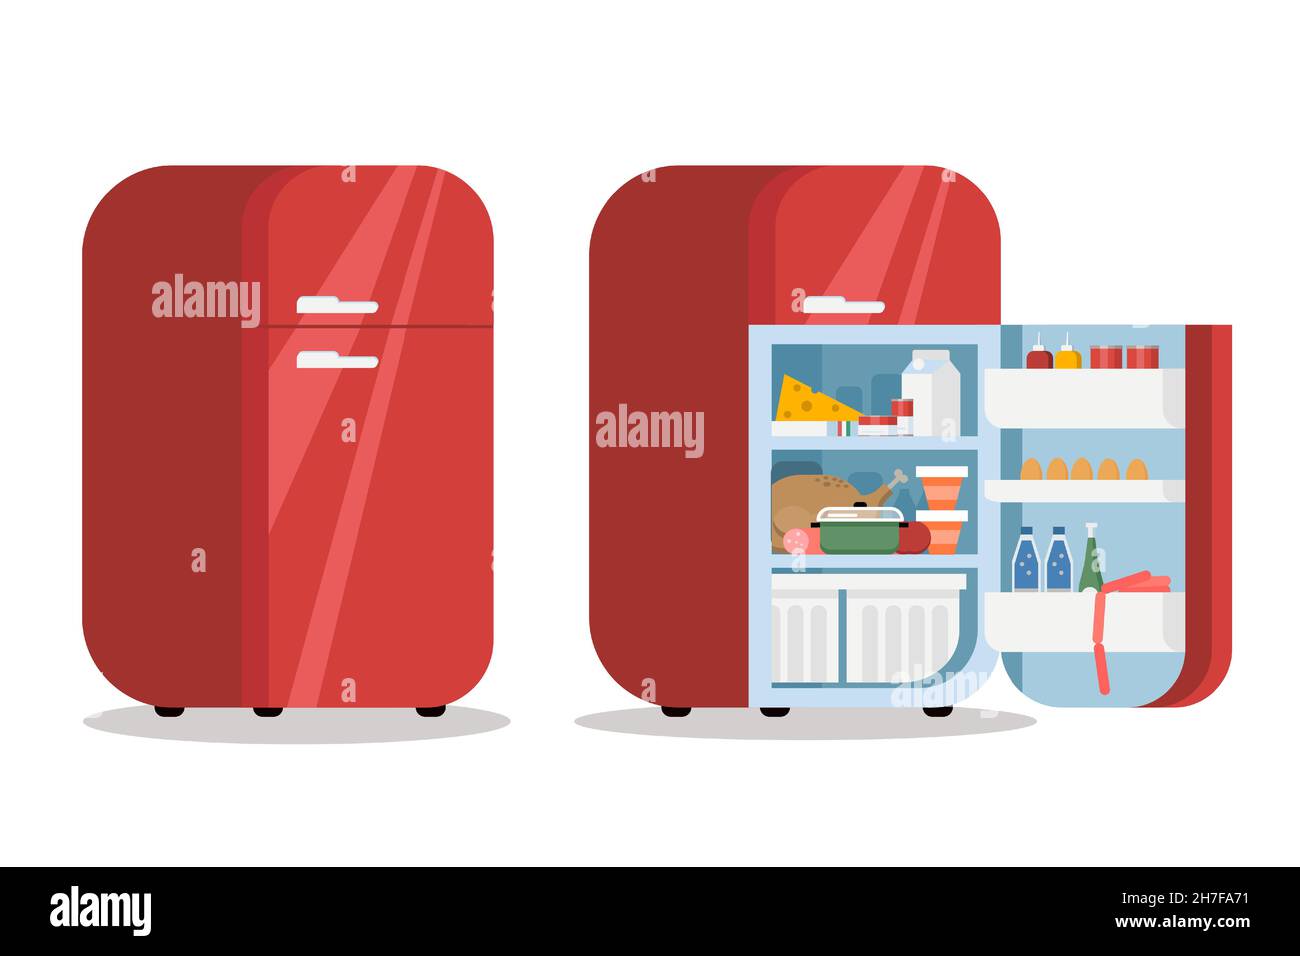 Open and close fridge. Refrigerator with food. Flat style vector illustration. Stock Vector